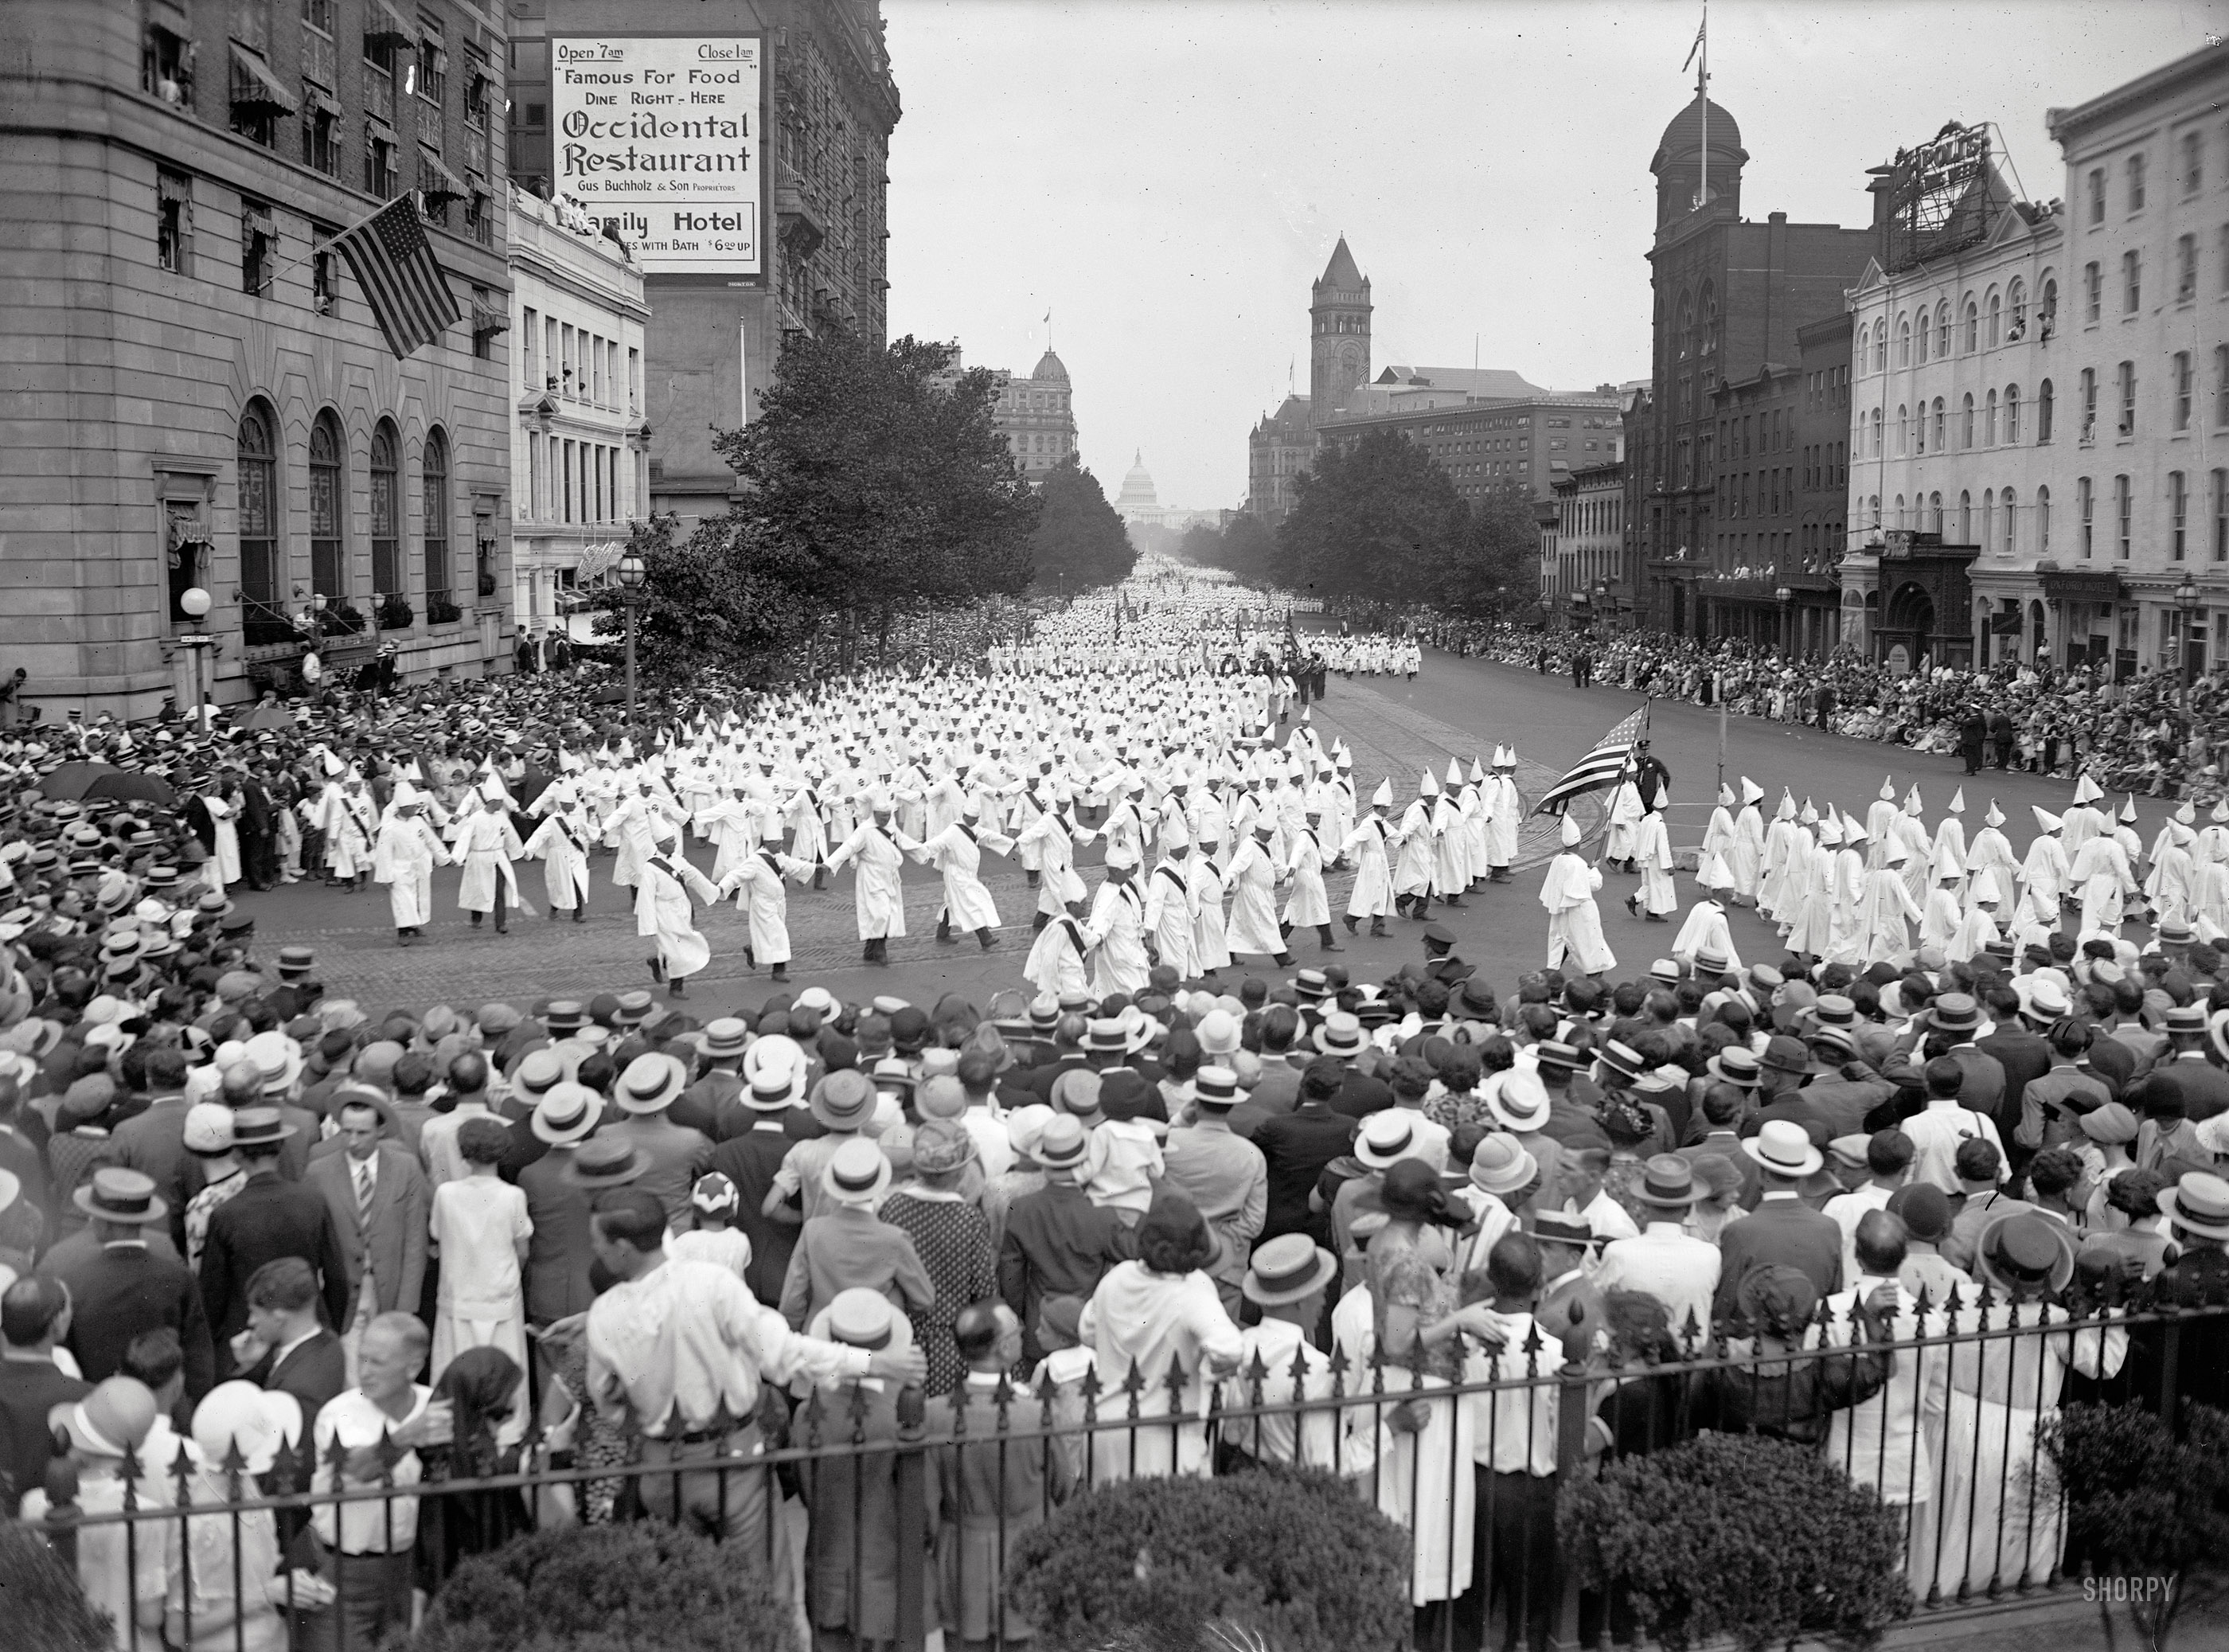 "KKK parade on Pennsylvania Avenue, August 8, 1925." From the Washington Post's report: "Phantom-like hosts of the Ku Klux Klan spread their white robe over the nation's most historic thoroughfare yesterday in one of the greatest demonstrations this city has ever known. . . . Police estimated that there were 30,000-35,000 in the weird procession -- men, women and children of the Klan." National Photo Company Collection glass negative. View full size.